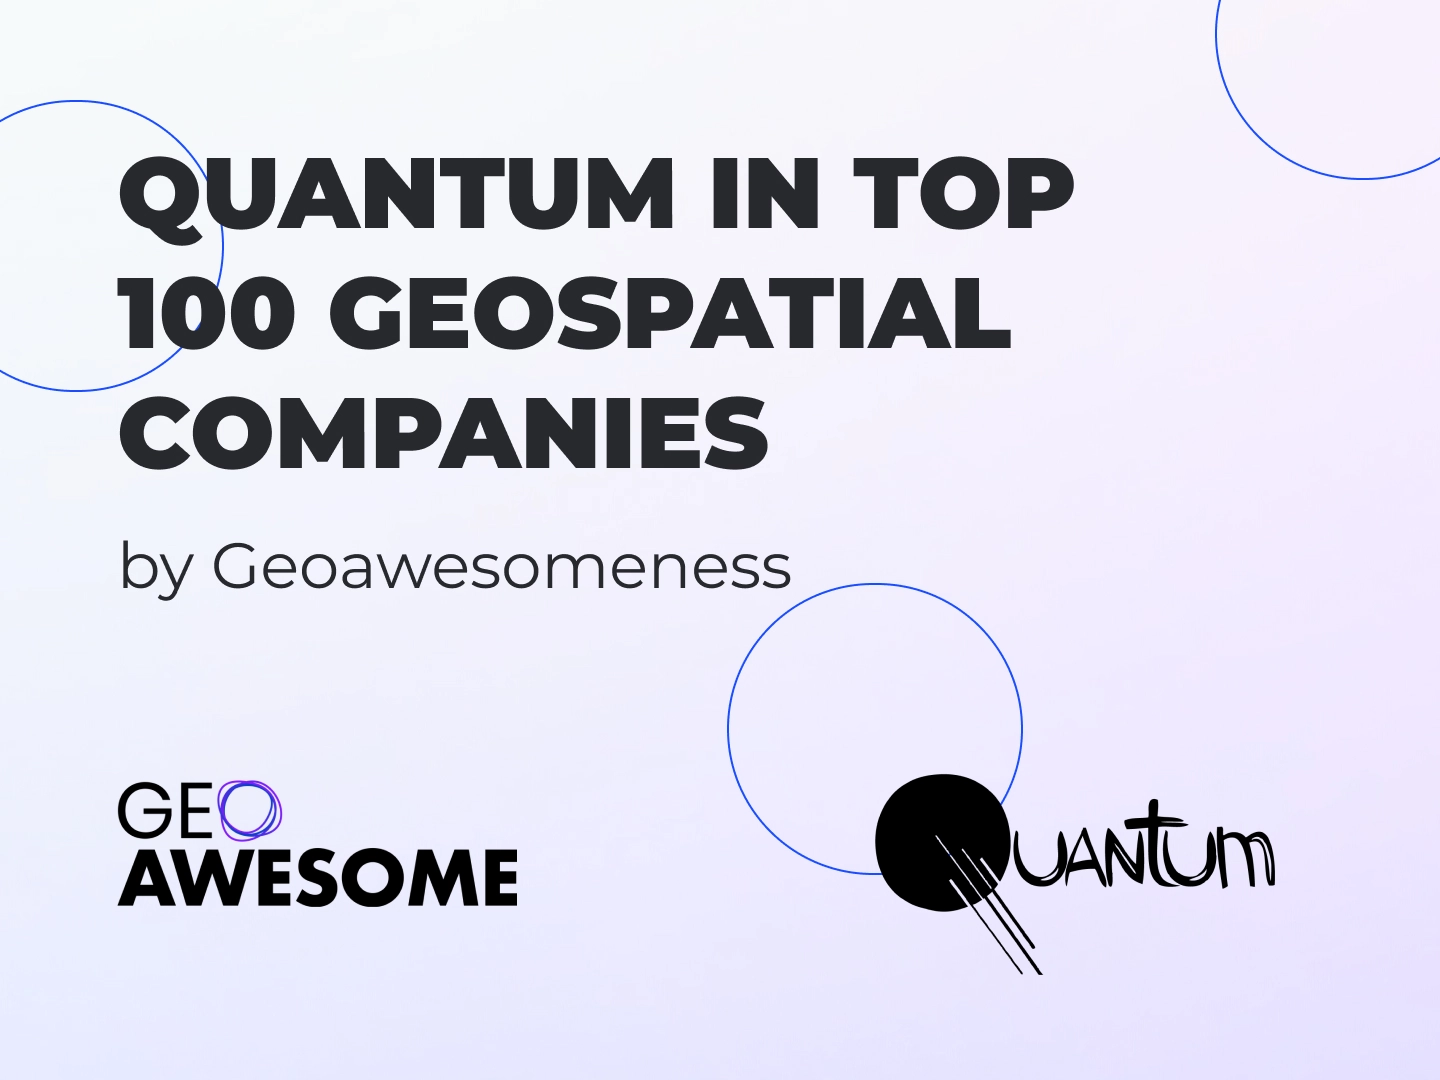 Quantum top 100 by Geoawesomeness